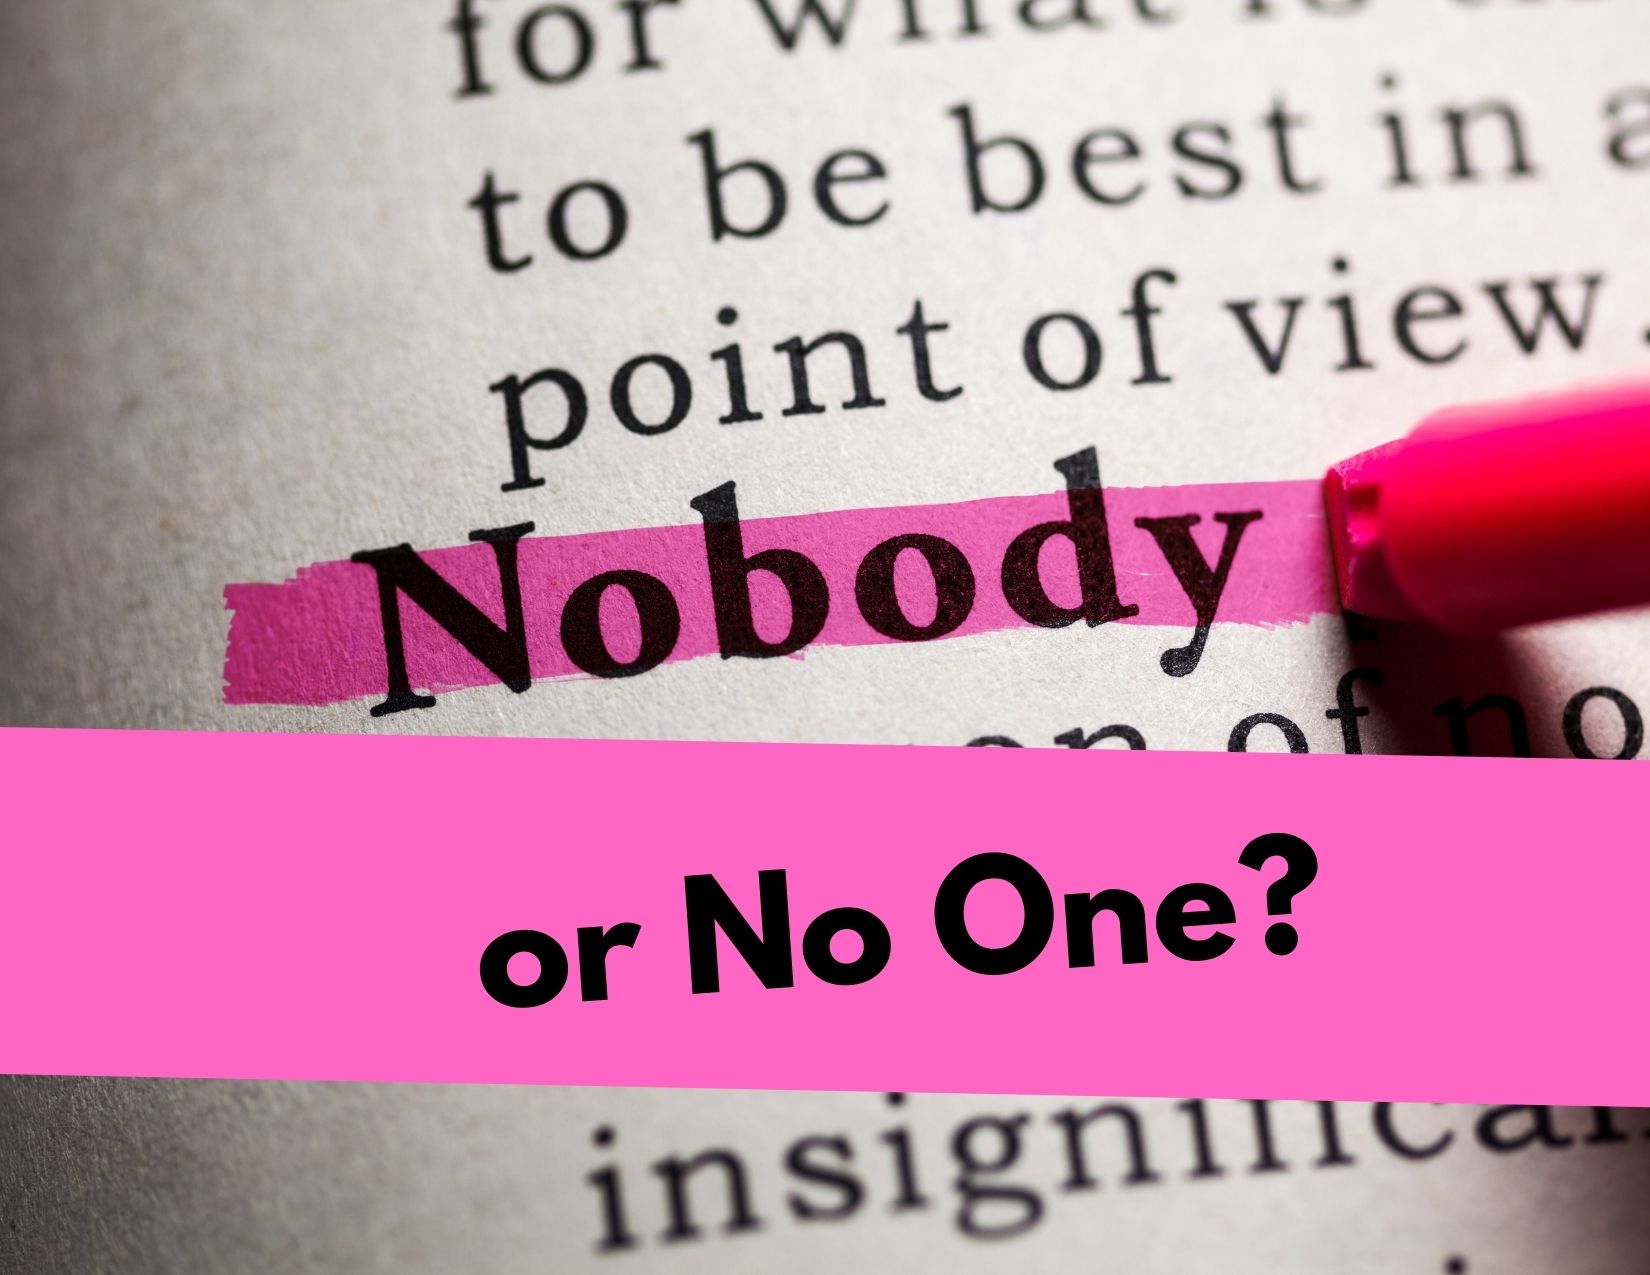 A graphic showing the words Nobody in the dictionary with the words "or No One?" right below.